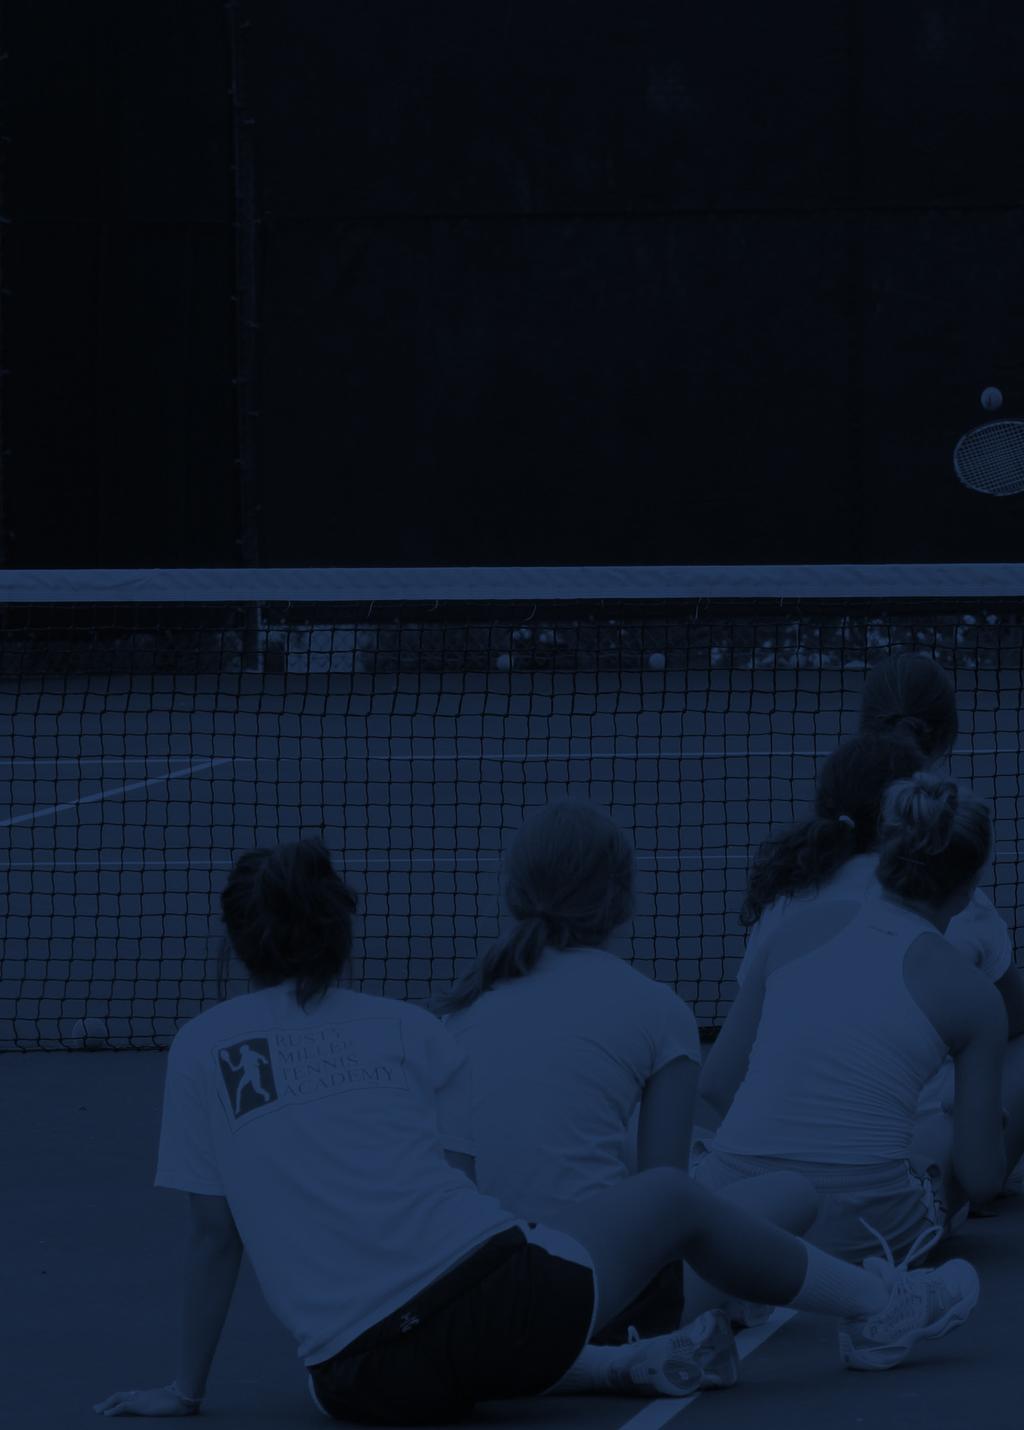 COACHING USD s Women s Tennis Head Coach Sherri Stephens and Assistant Coach Patricia Tarabini are directly involved with the summer tennis camps.